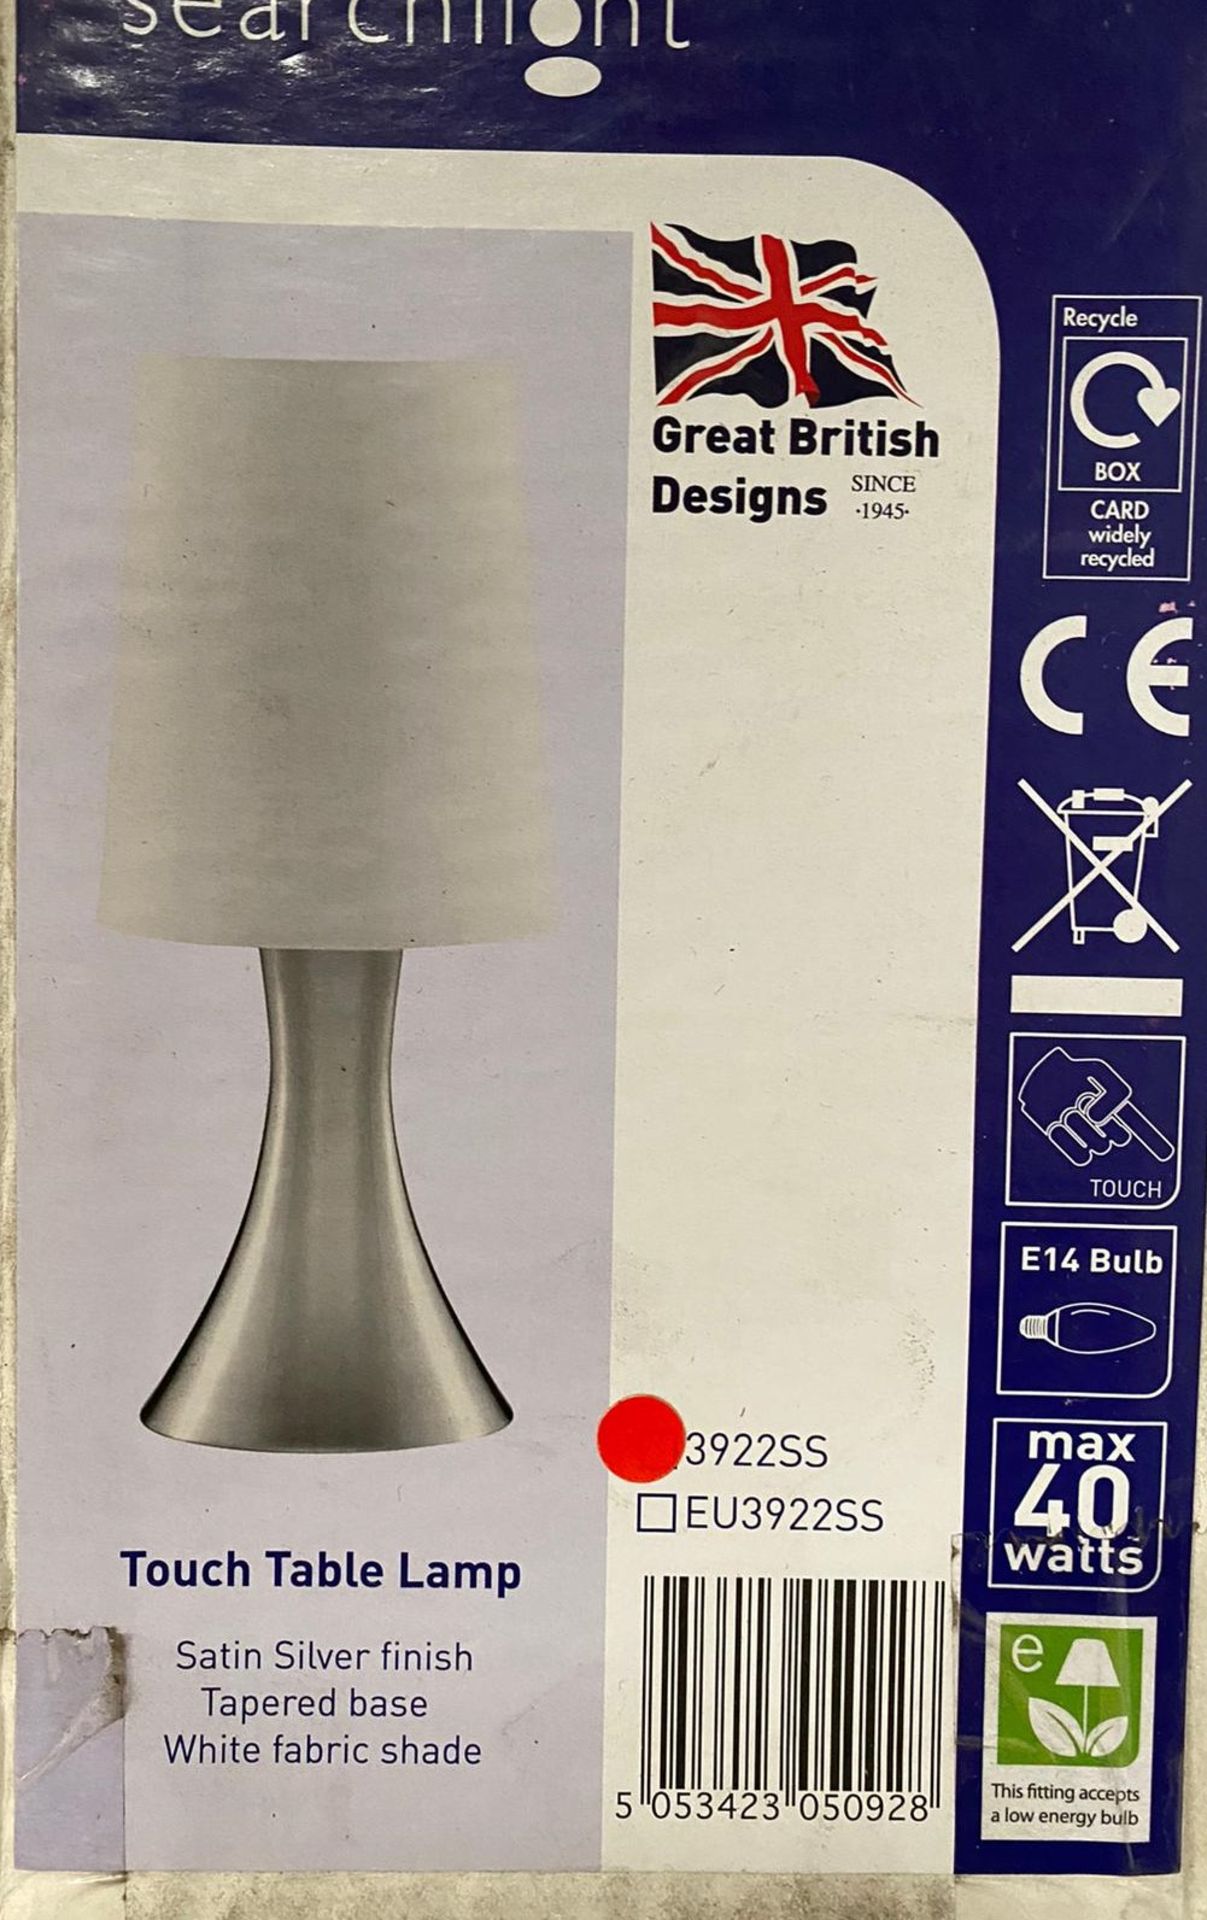 1 x Searchlight Touch Table Lamp in satin silver - Ref: 3922SS - New and Boxed Stock -